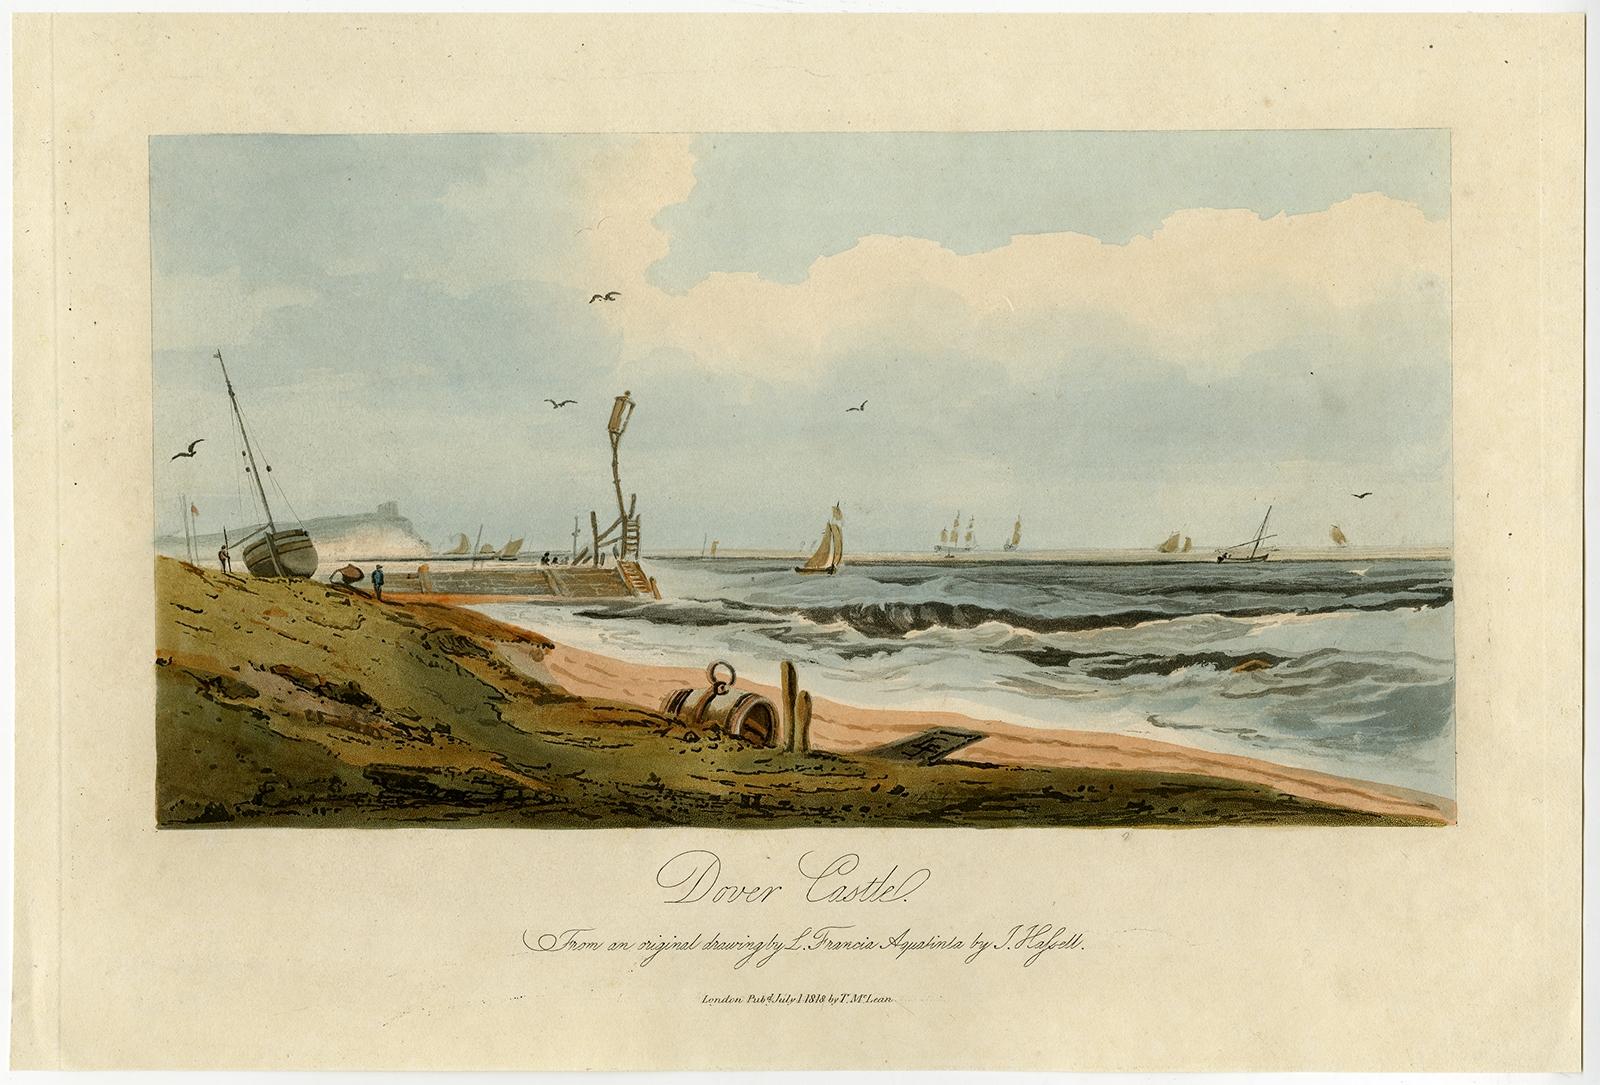 Antique print, titled: 'Dover Castle.' 

A view of the beach and sea with Dover Castle atop the cliffs in the background. Published by T. McLean in 1818.

Artists and Engravers: Made by 'J. Hassell' after 'L. Francia'. John Hassell (1767-1825)